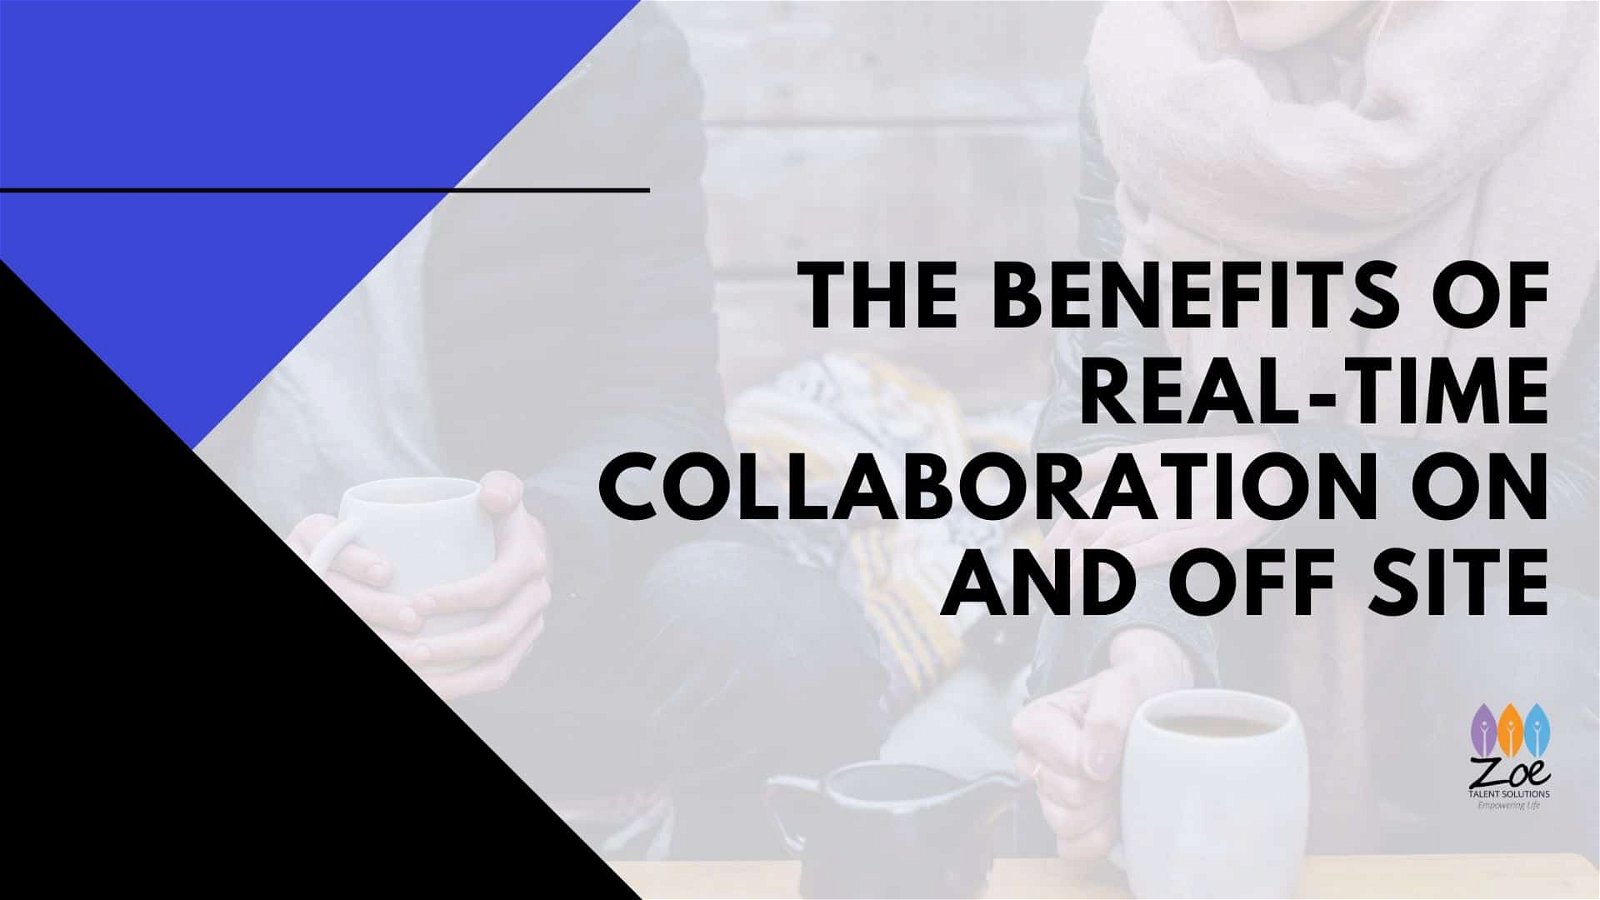 The Benefits of Real-Time Collaboration on and off Site